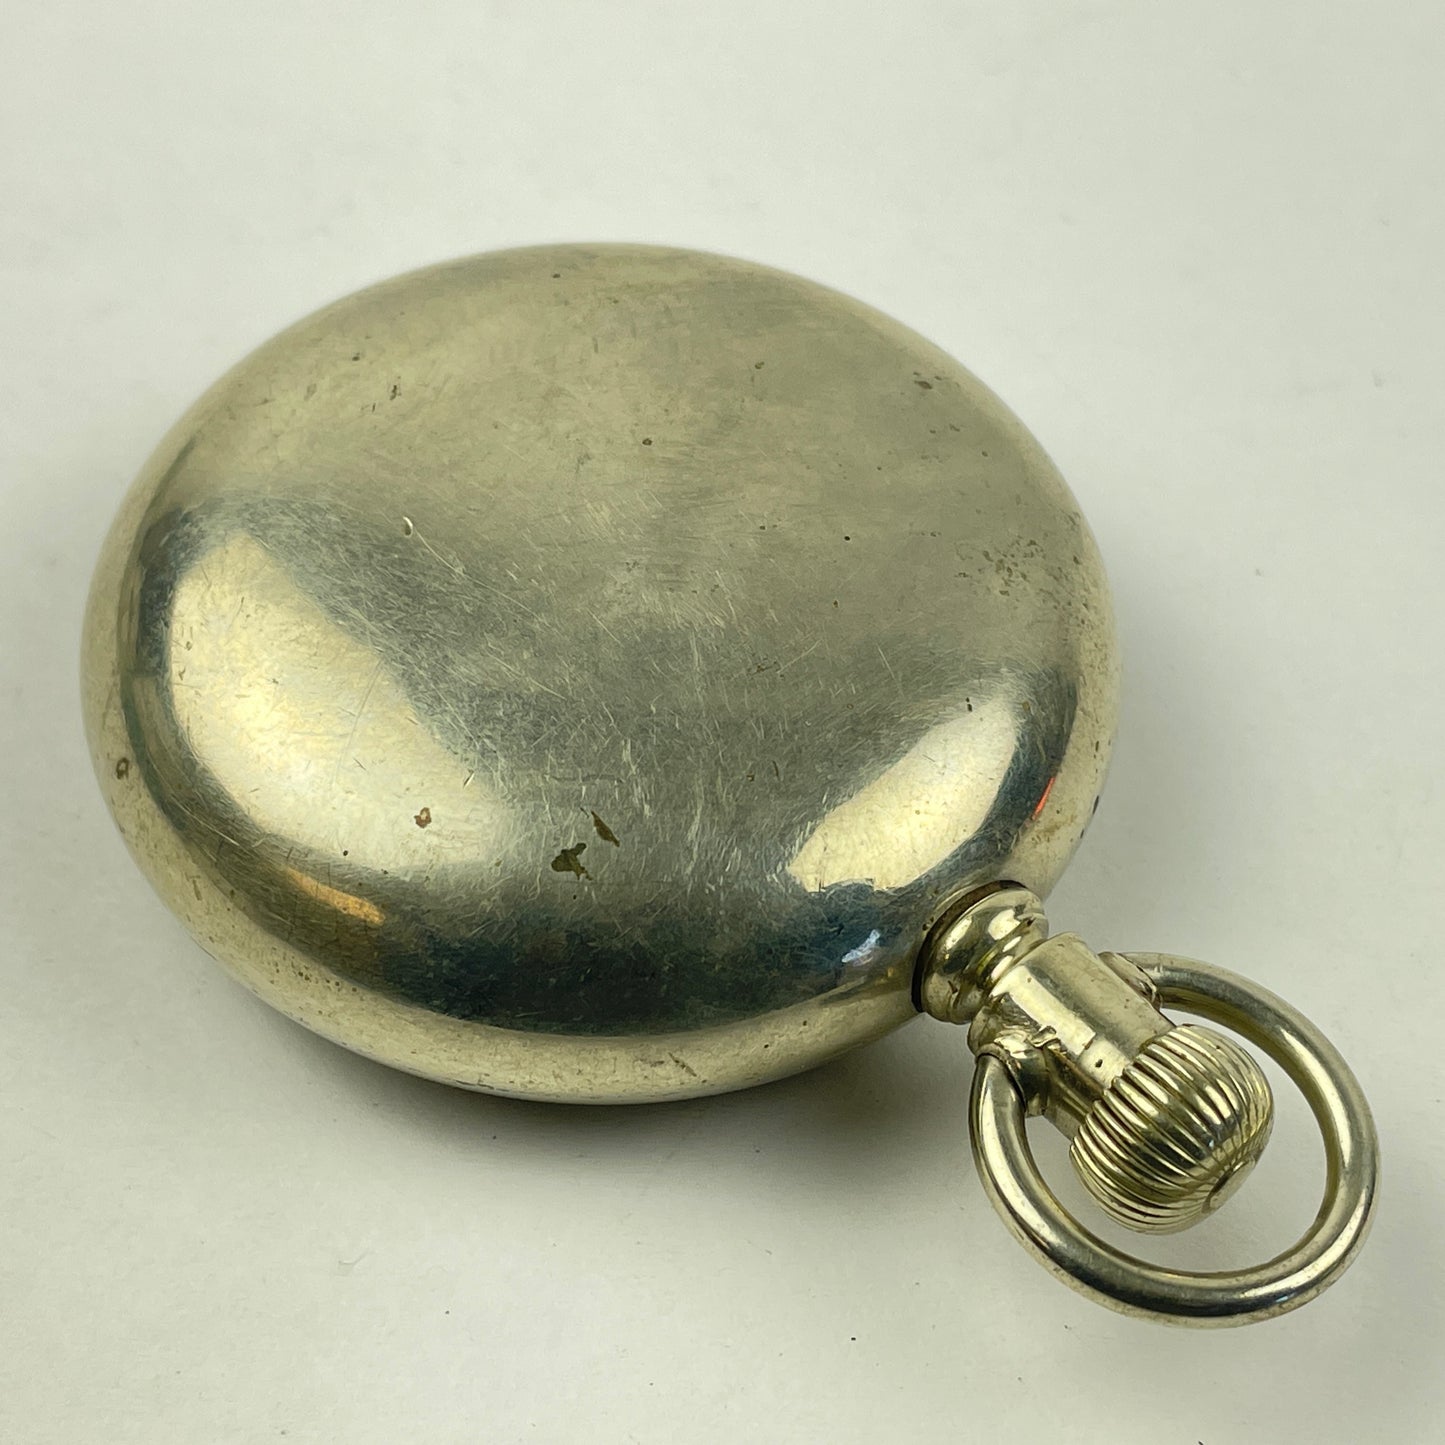 Lot 73- American Crescent 18 Size Swing Out Nickel Pocket Watch Case